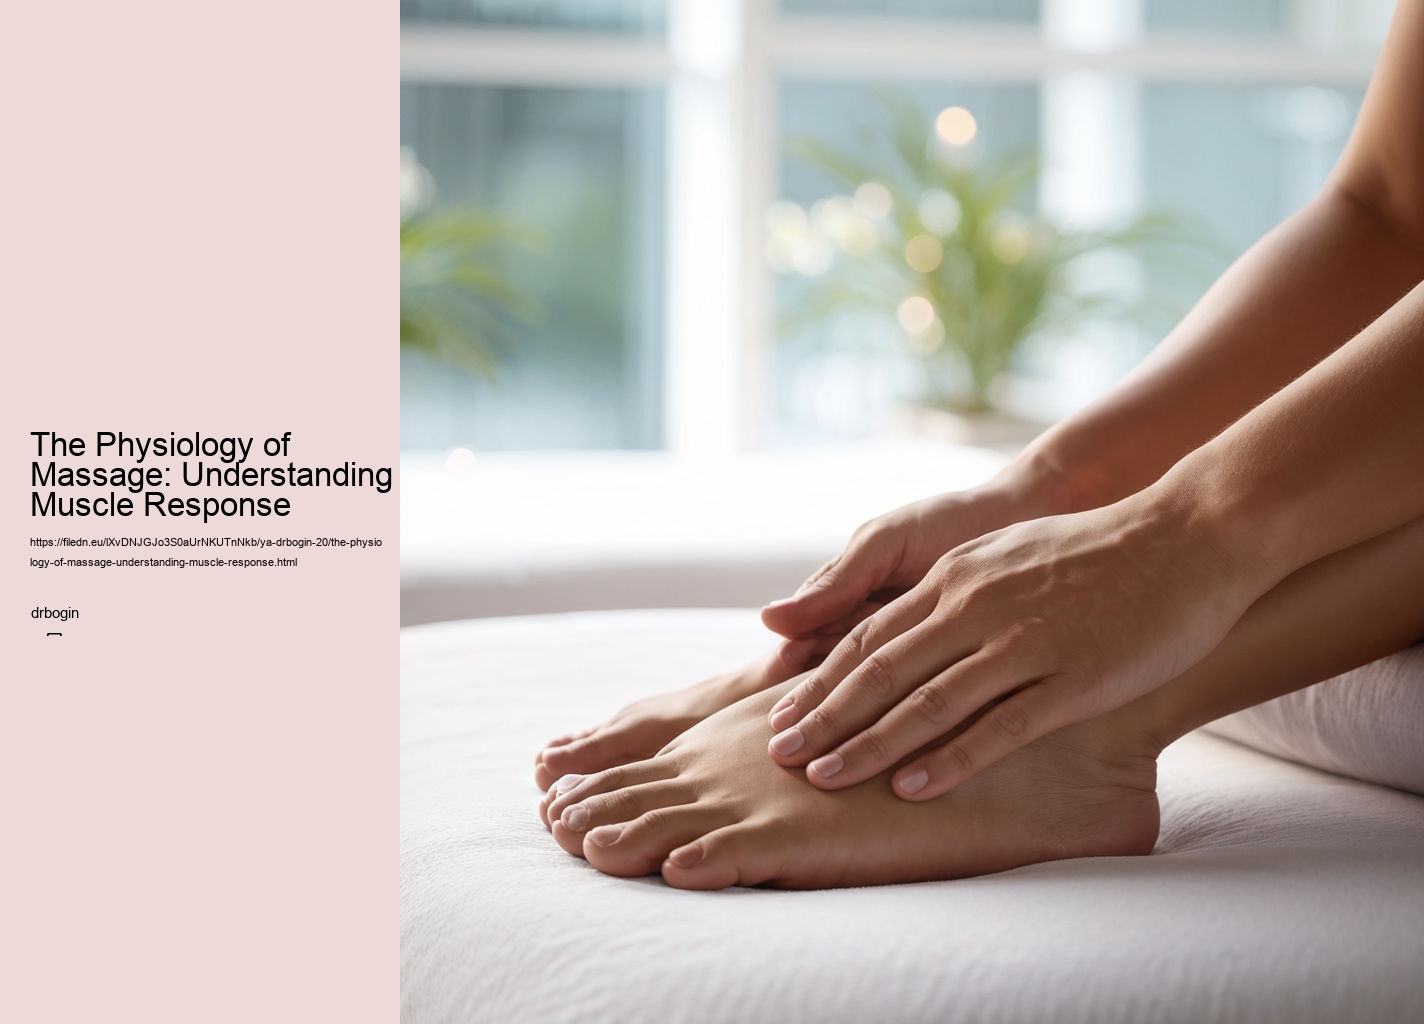 The Physiology of Massage: Understanding Muscle Response